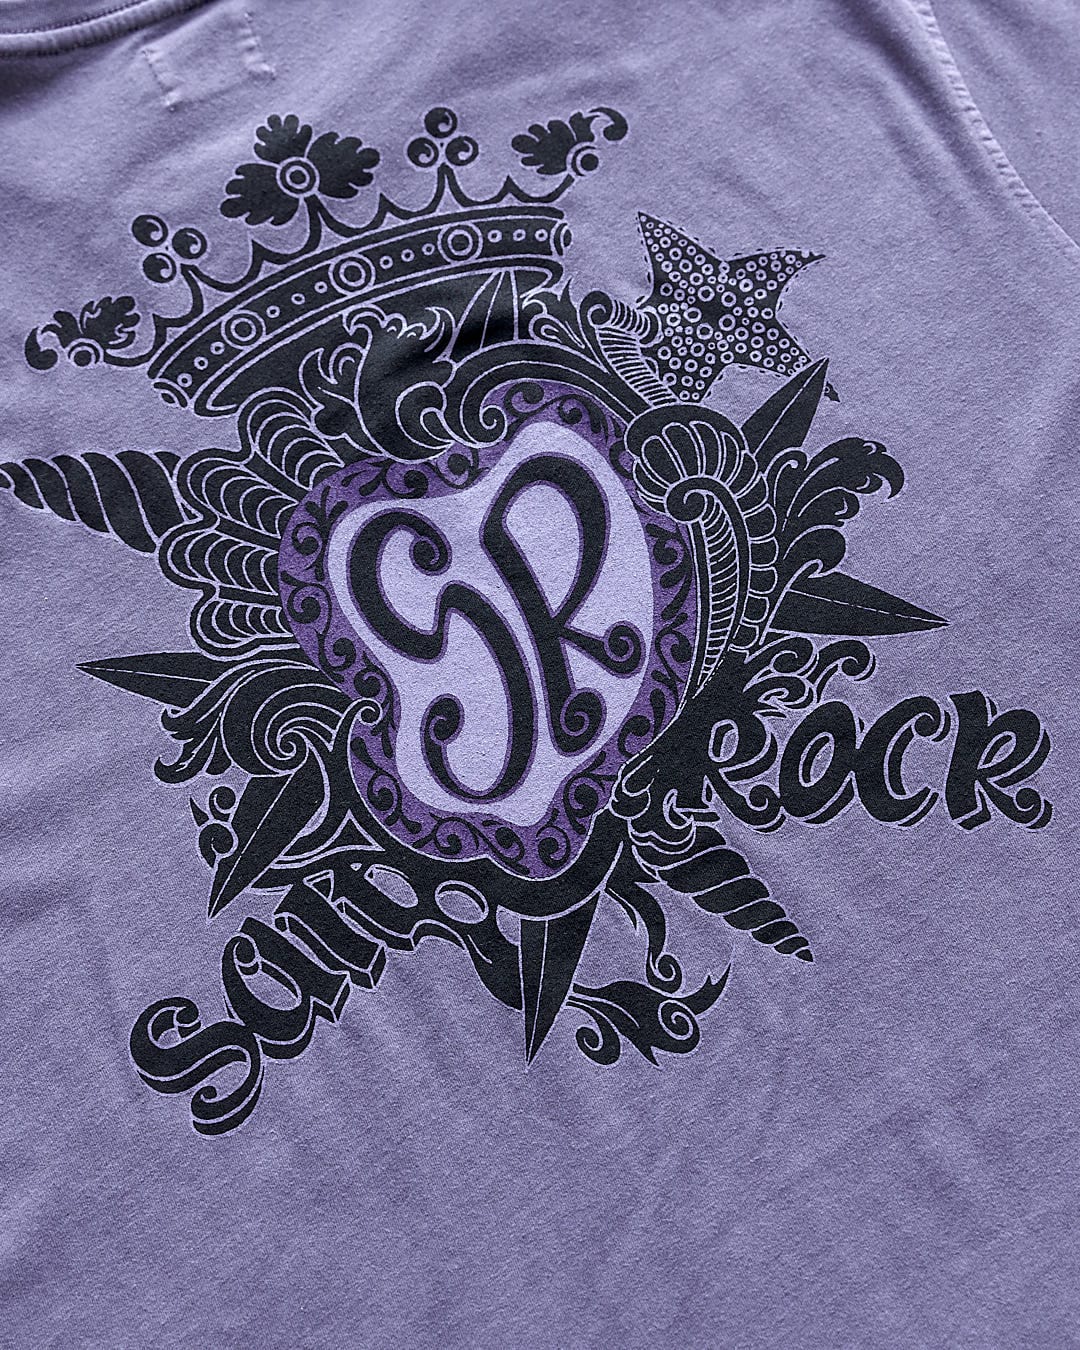 A Tribal Saltrock - Limited Edition 35 Years T-Shirt with an ornate design on it.